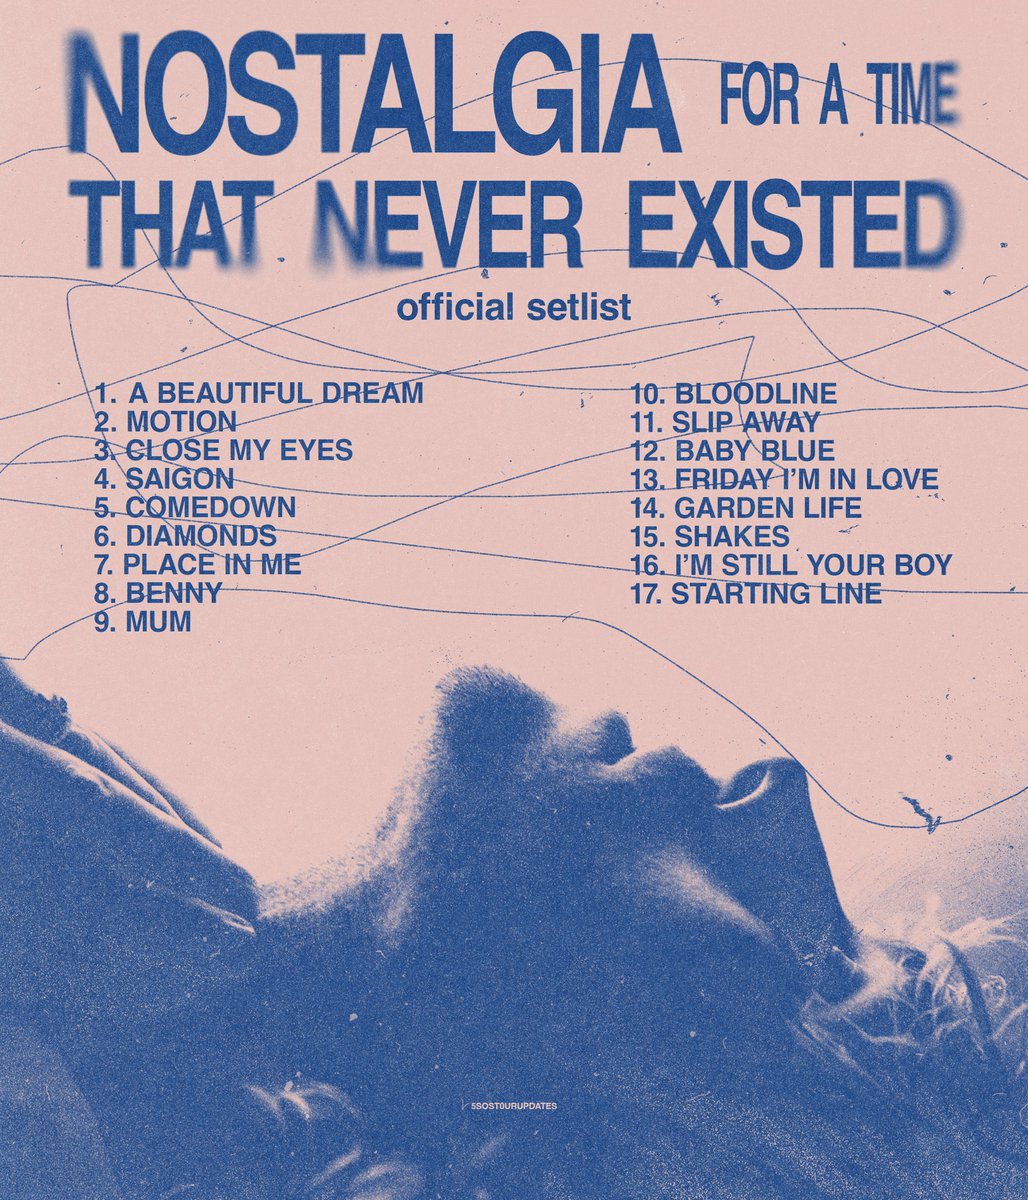 The Official Setlist for Nostalgia For A Time That Never Existed Tour! #NostalgiaForParis